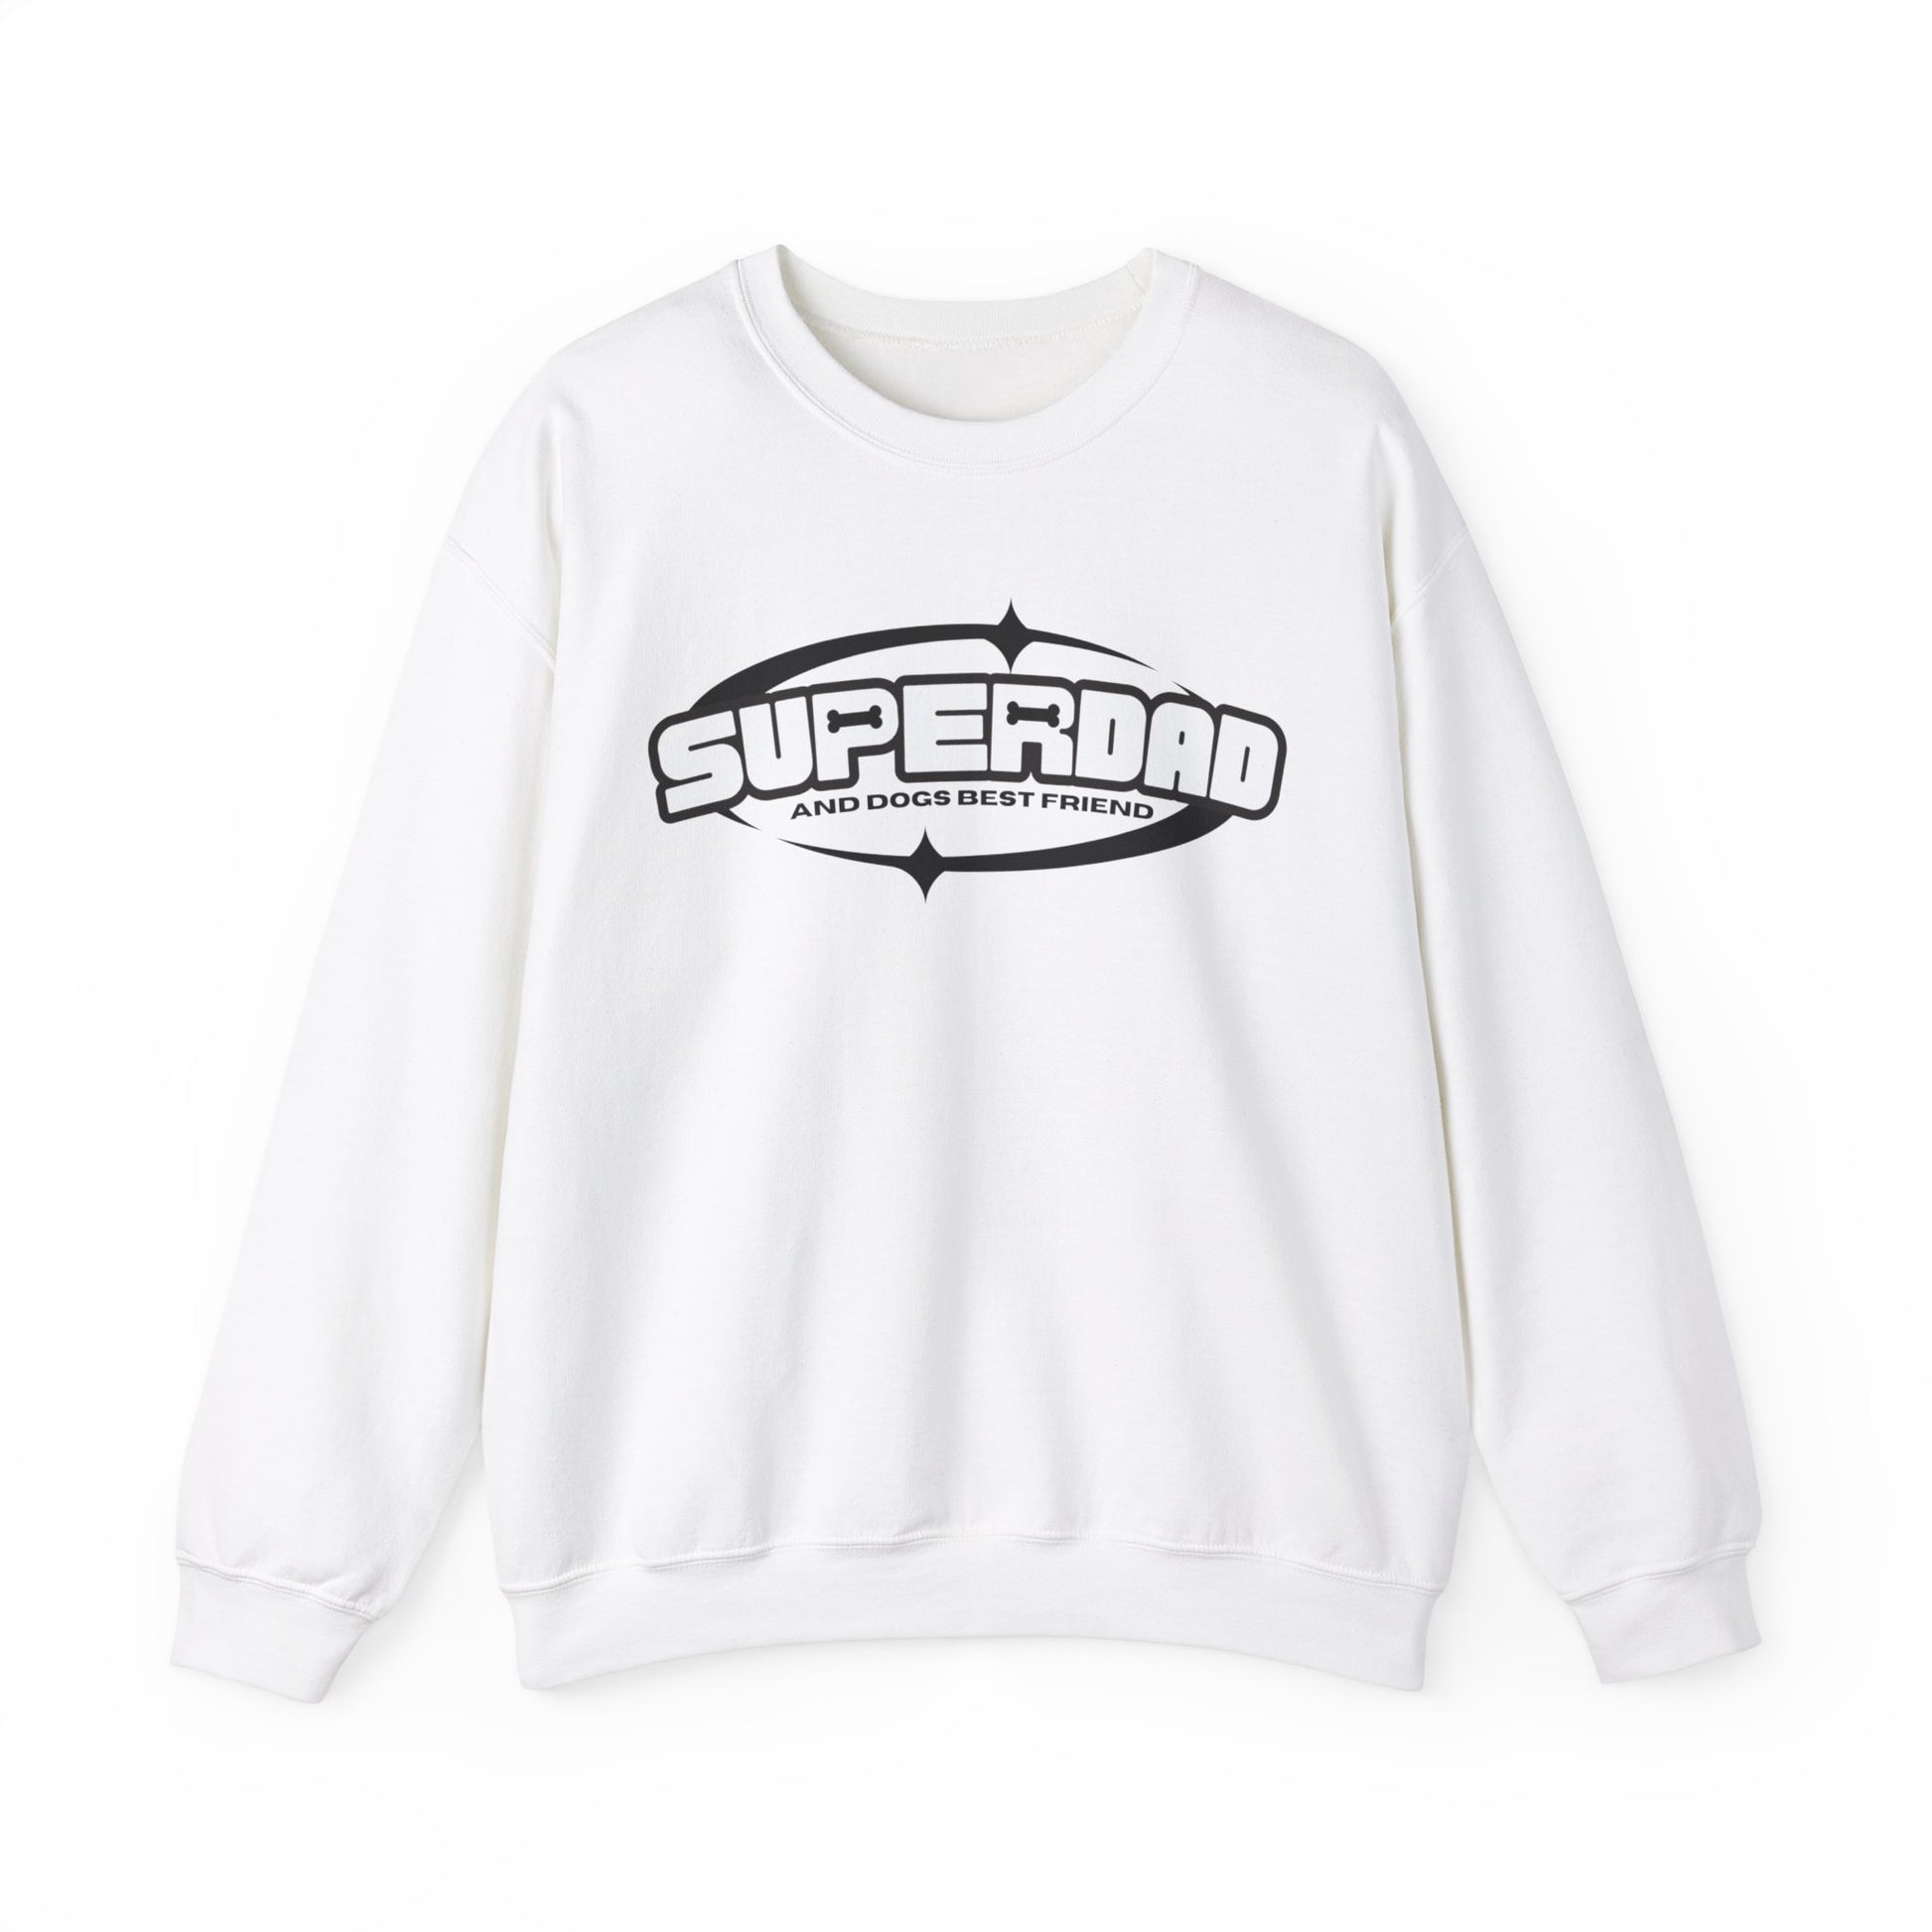  Presenting a white unisex sweatshirt from Dogs Pure Love, showcasing the "Superdad" print, set against a white background.